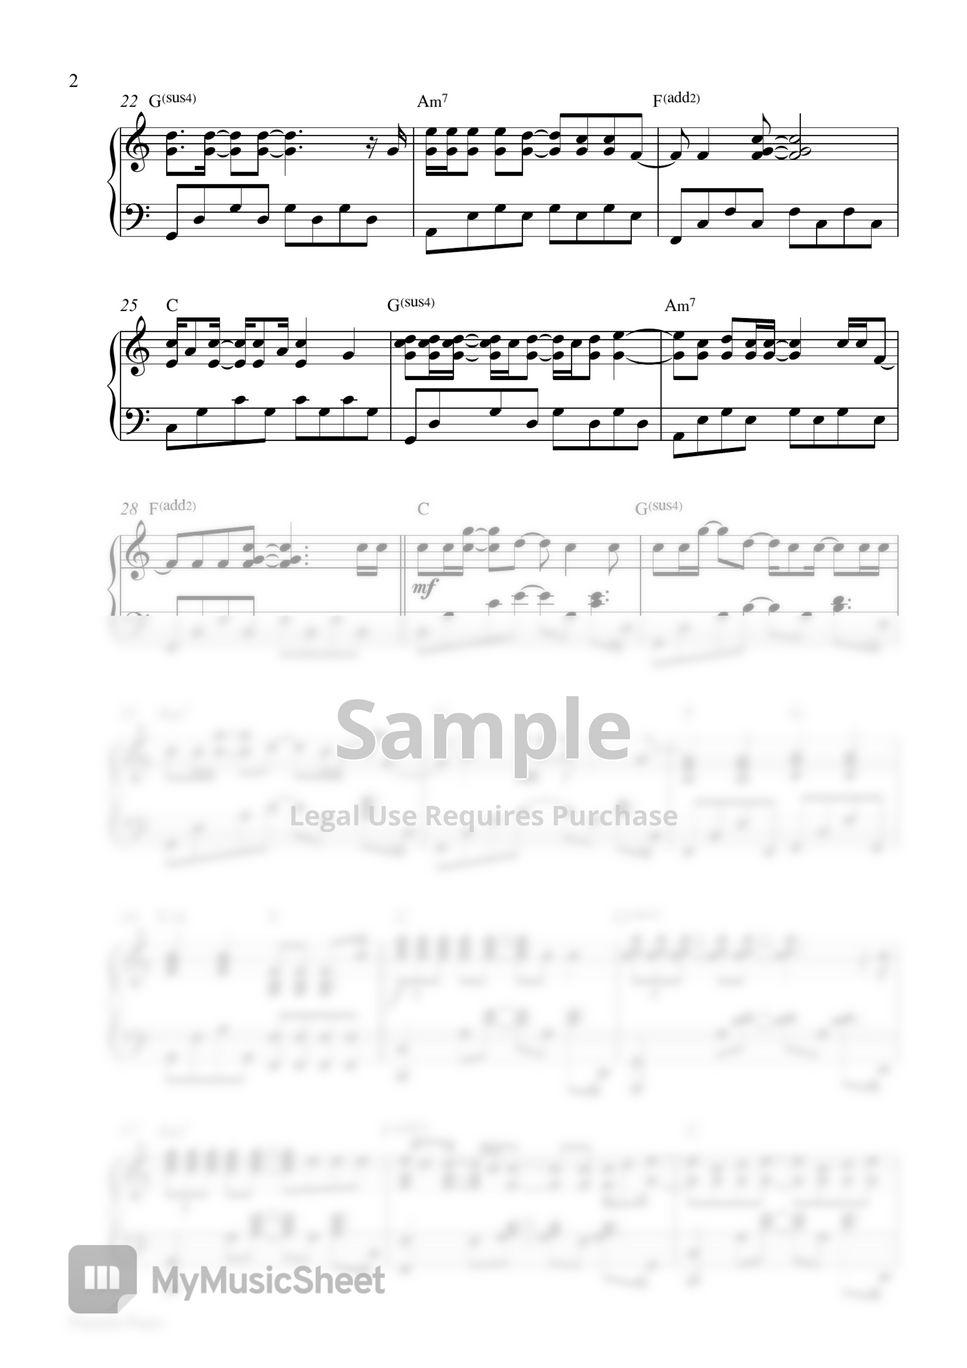 Taylor Swift - All Too Well (Piano Sheet) by Pianella Piano